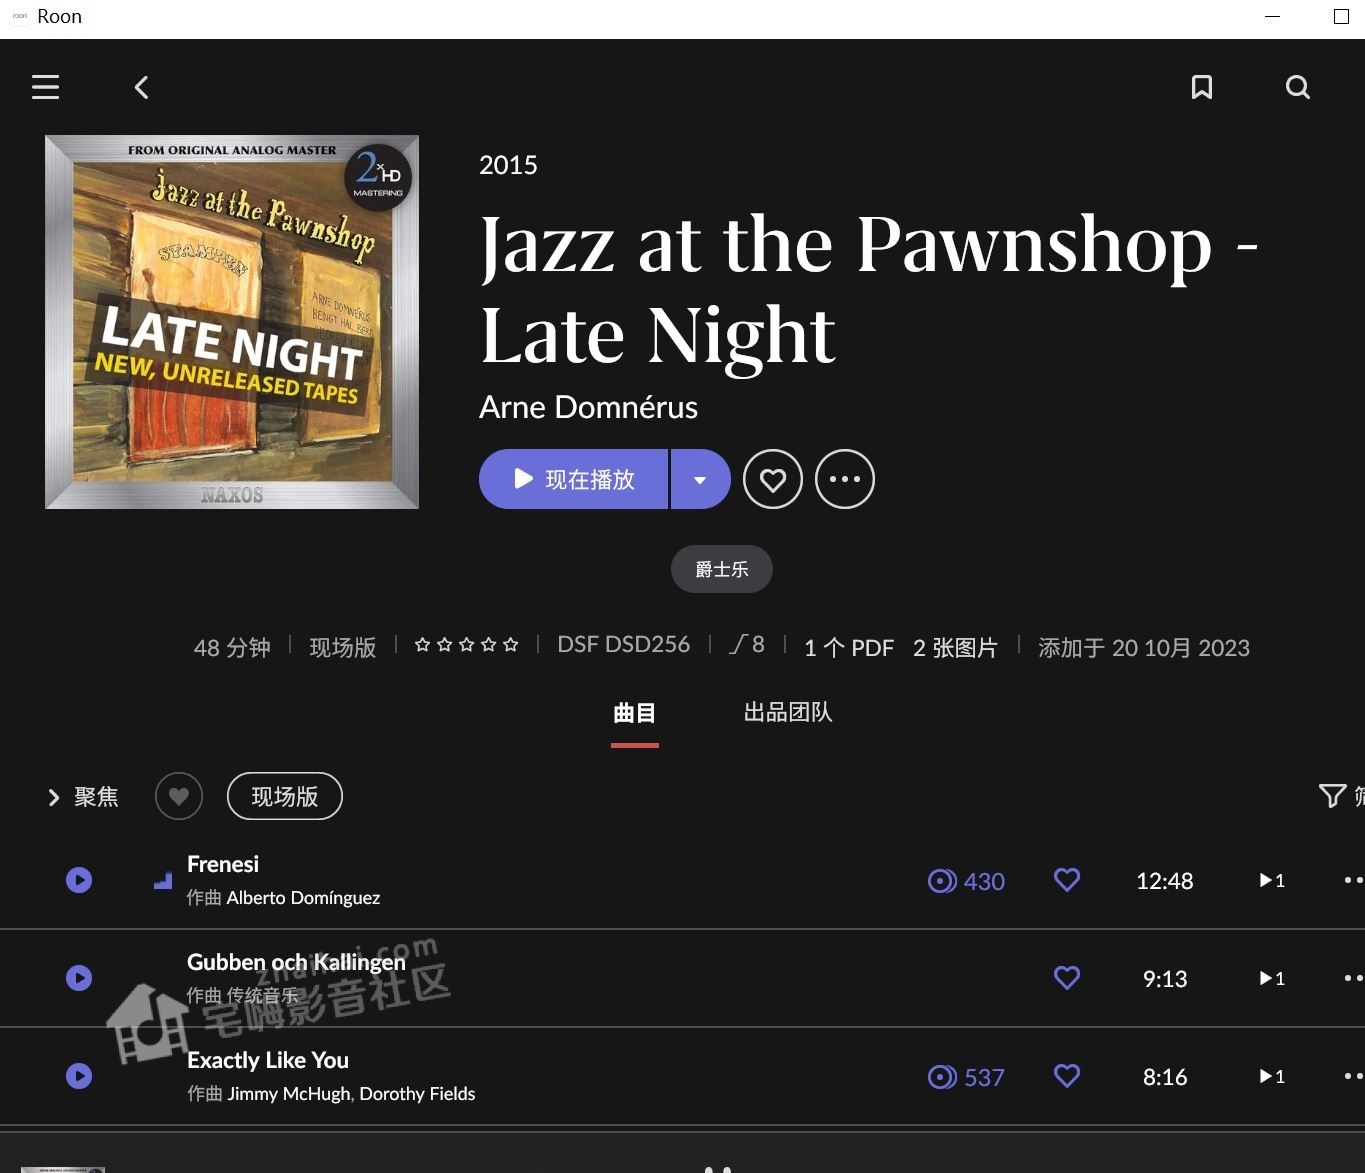 Jazz at-the Pawnshop-Late Night-New-Unreleased Tapes -2xHD-DSD256-2015.JPG